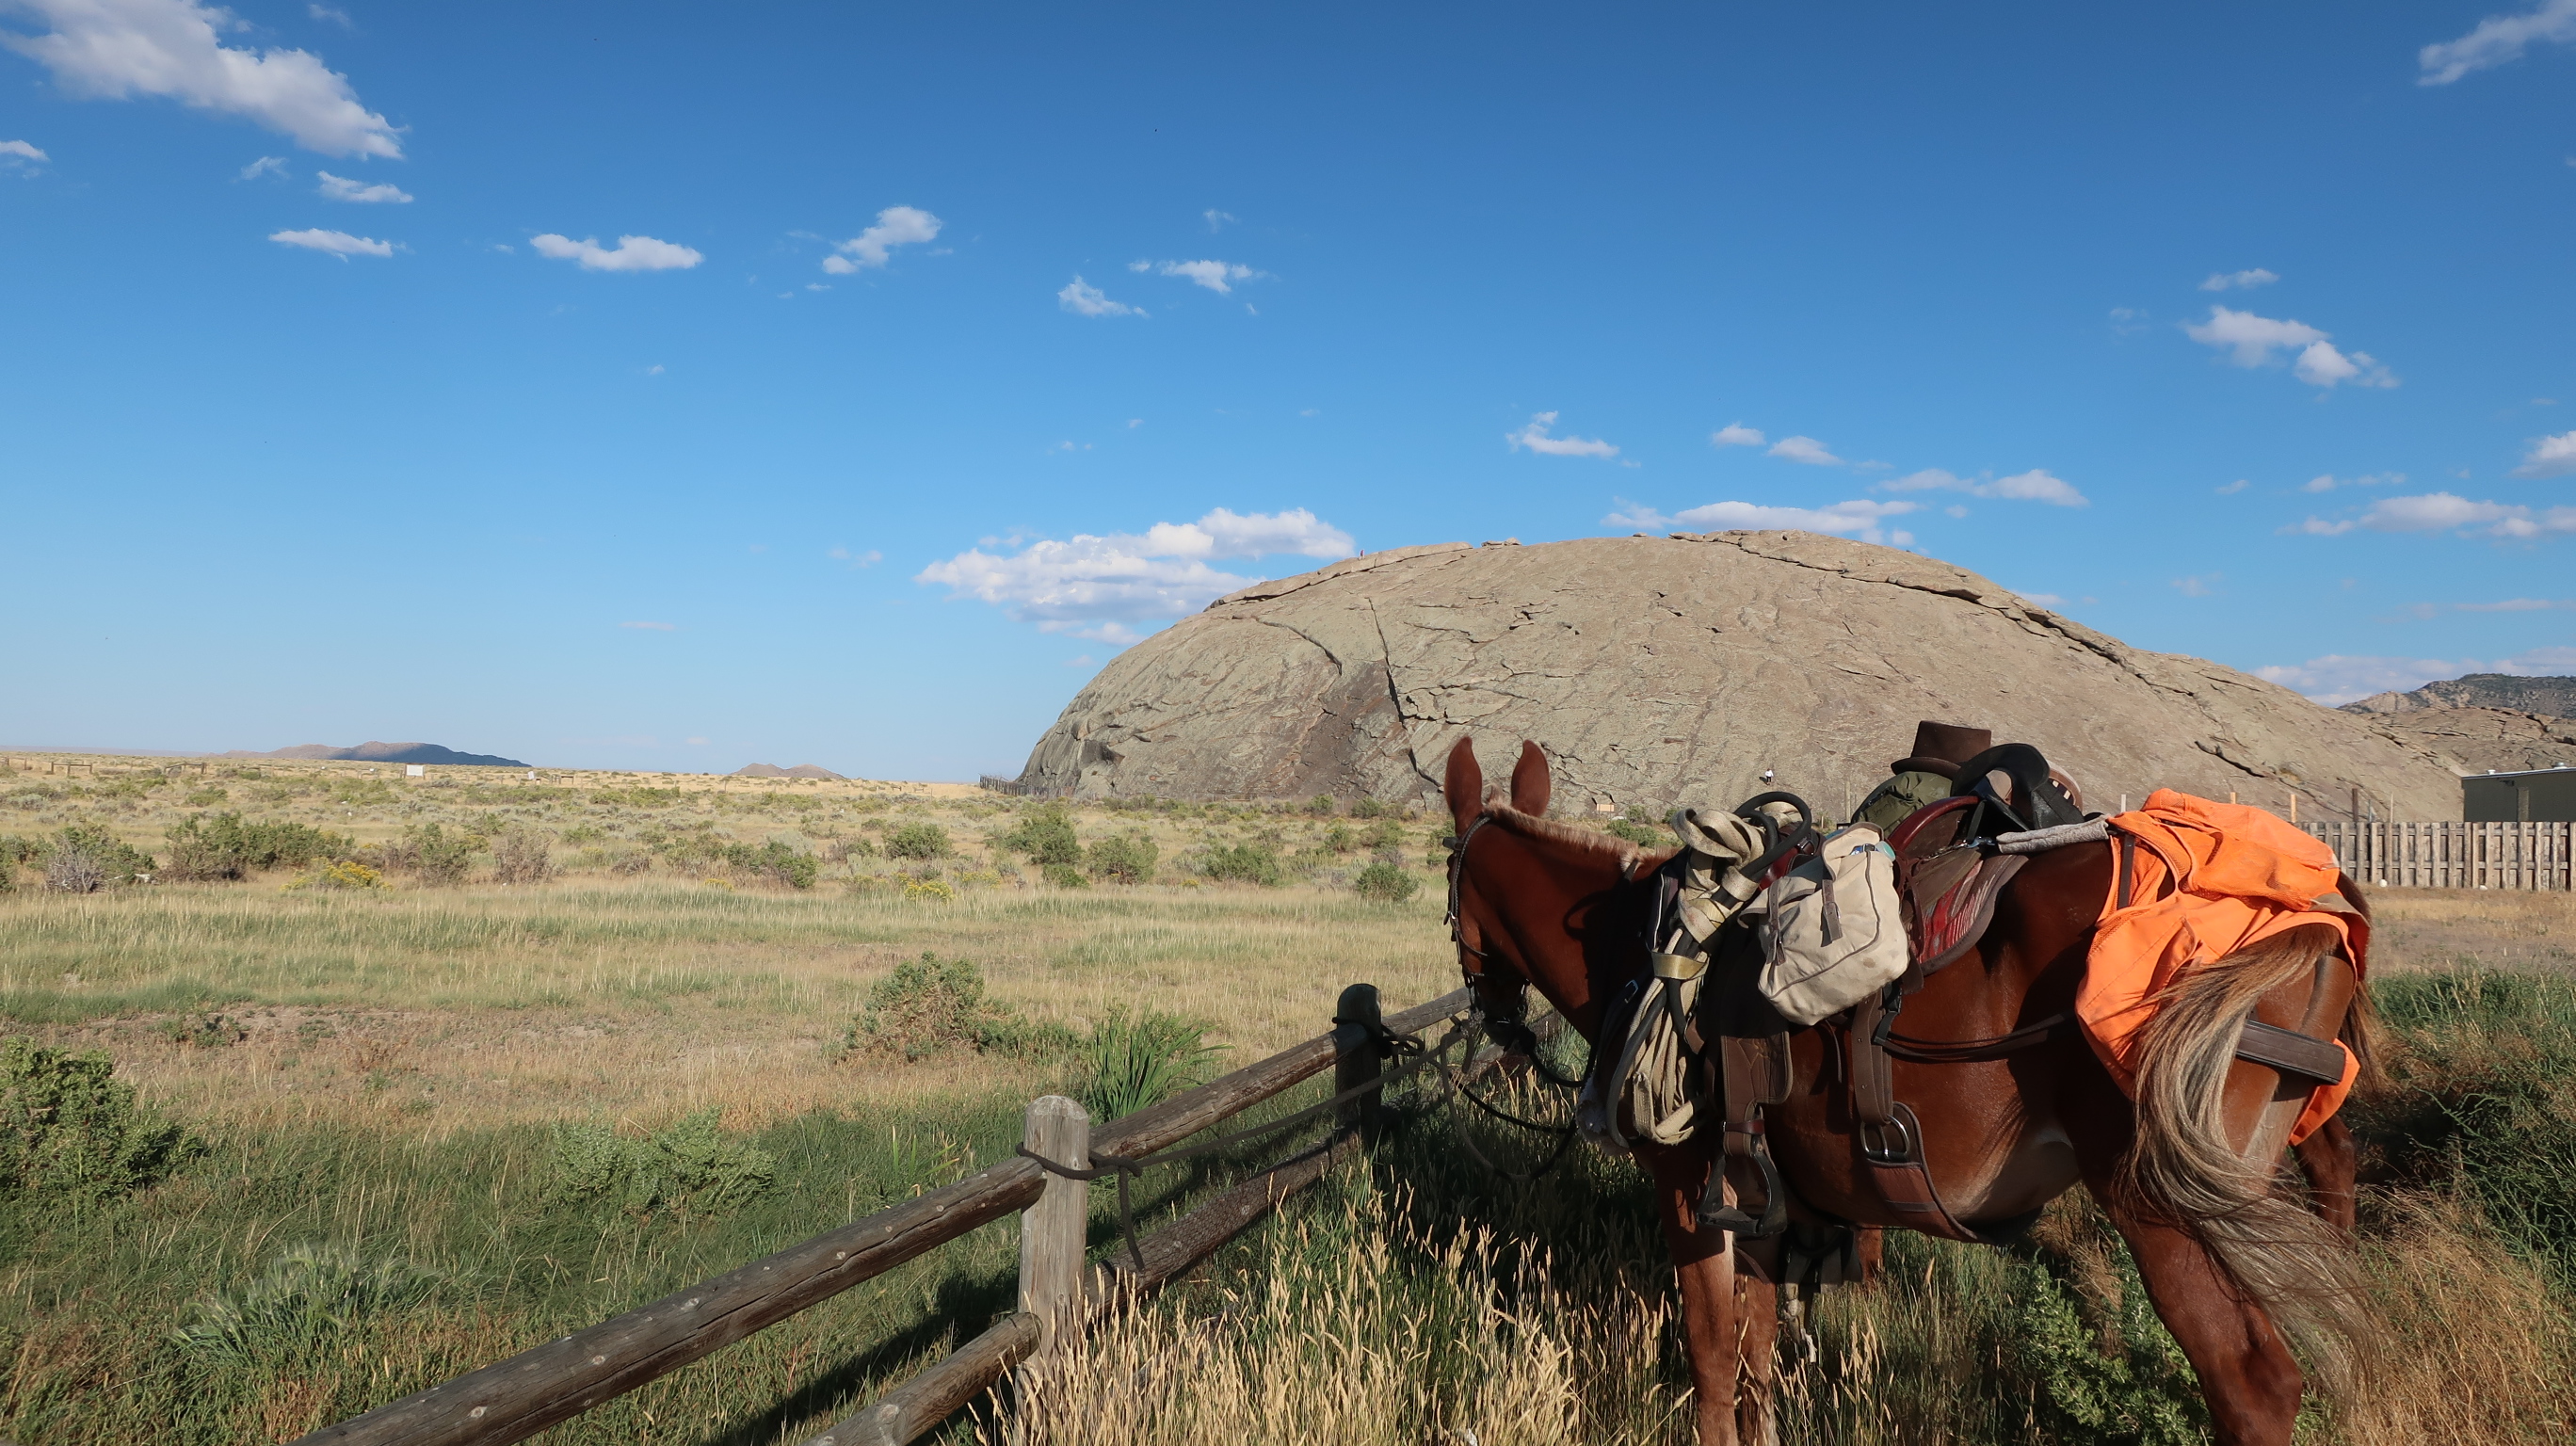 Independence Rock (Wyoming) and Musings on Letters and Humanity